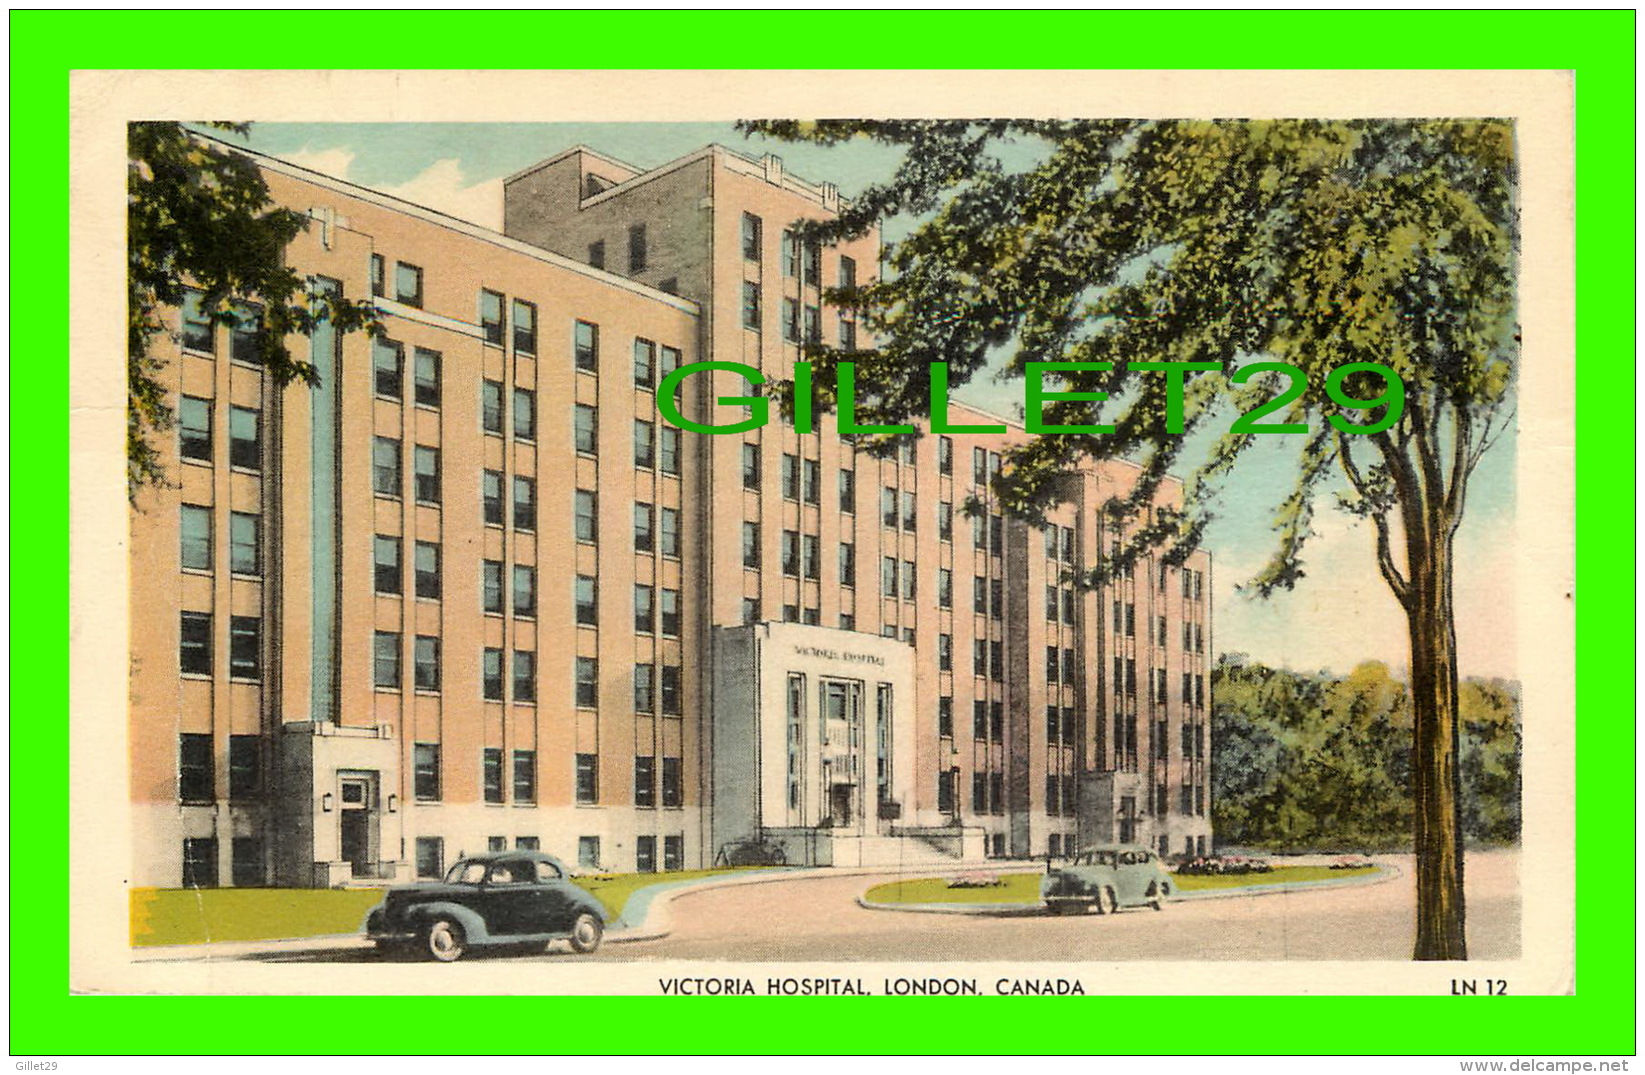 LONDON, ONTARIO - VICTORIA HOSPITAL - ANIMATED WITH OLD CARS - TRAVEL IN 1958 - VALENTINE-BLACK CO LTD - - London